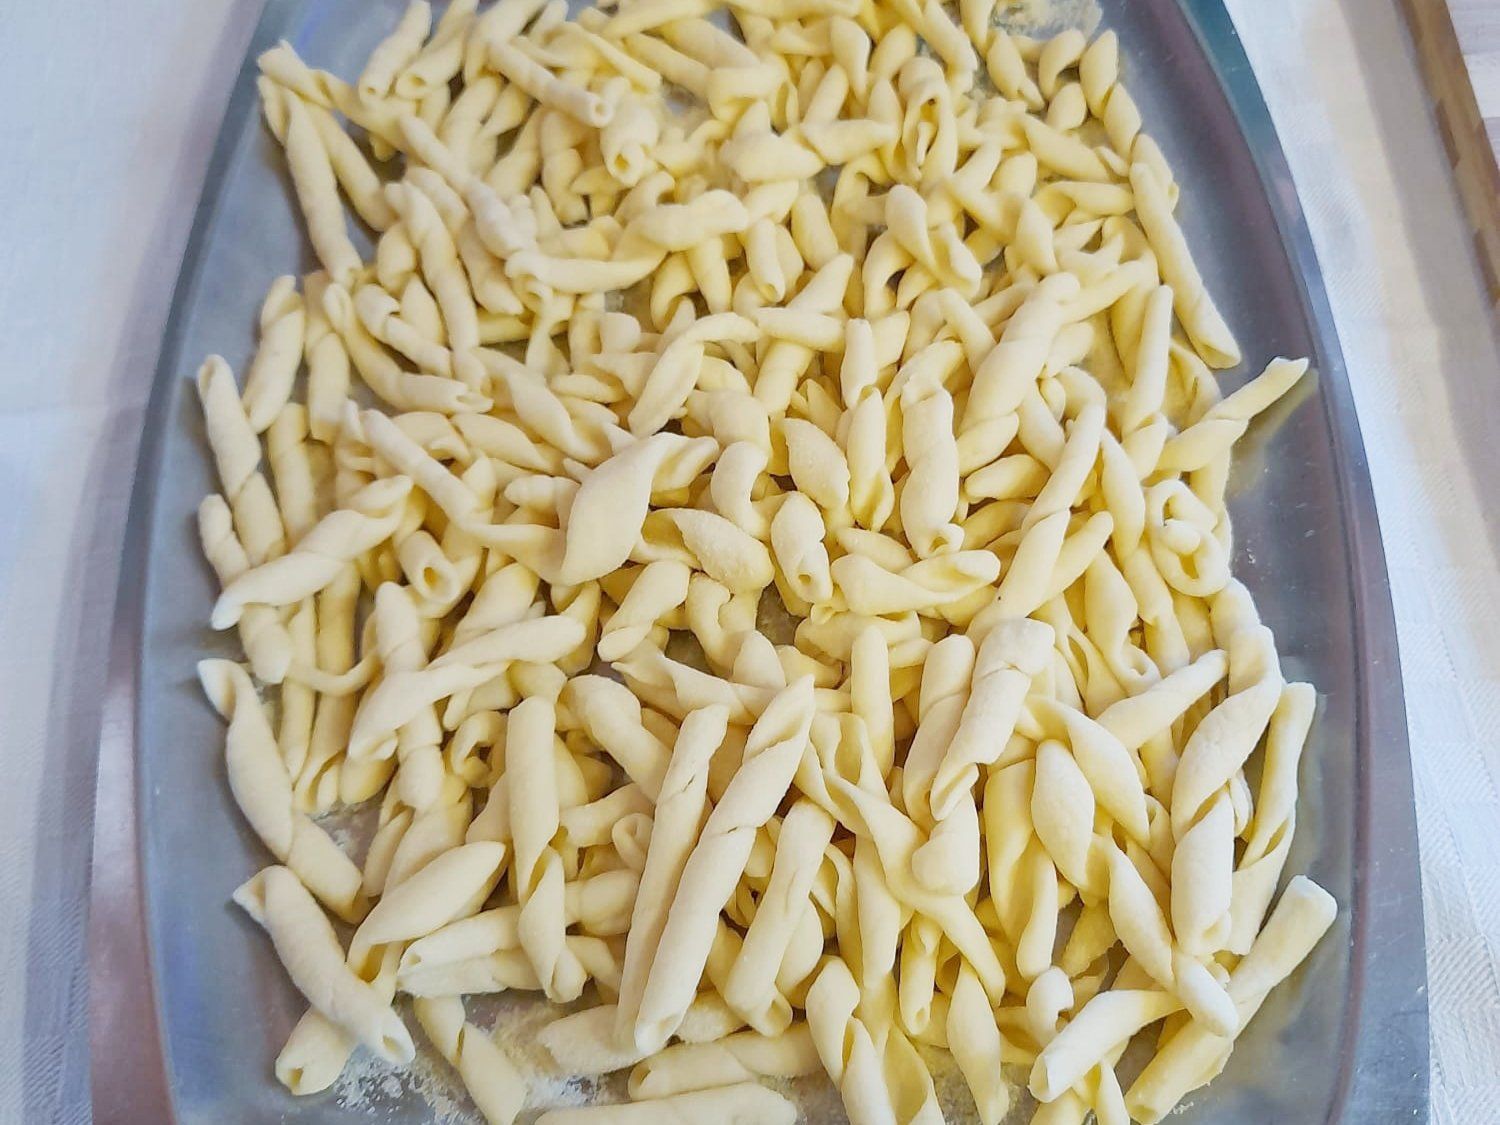 Francesco Grazzini: Homemade pasta and Lunch in the heart of Chianti - Book  Online - Cookly